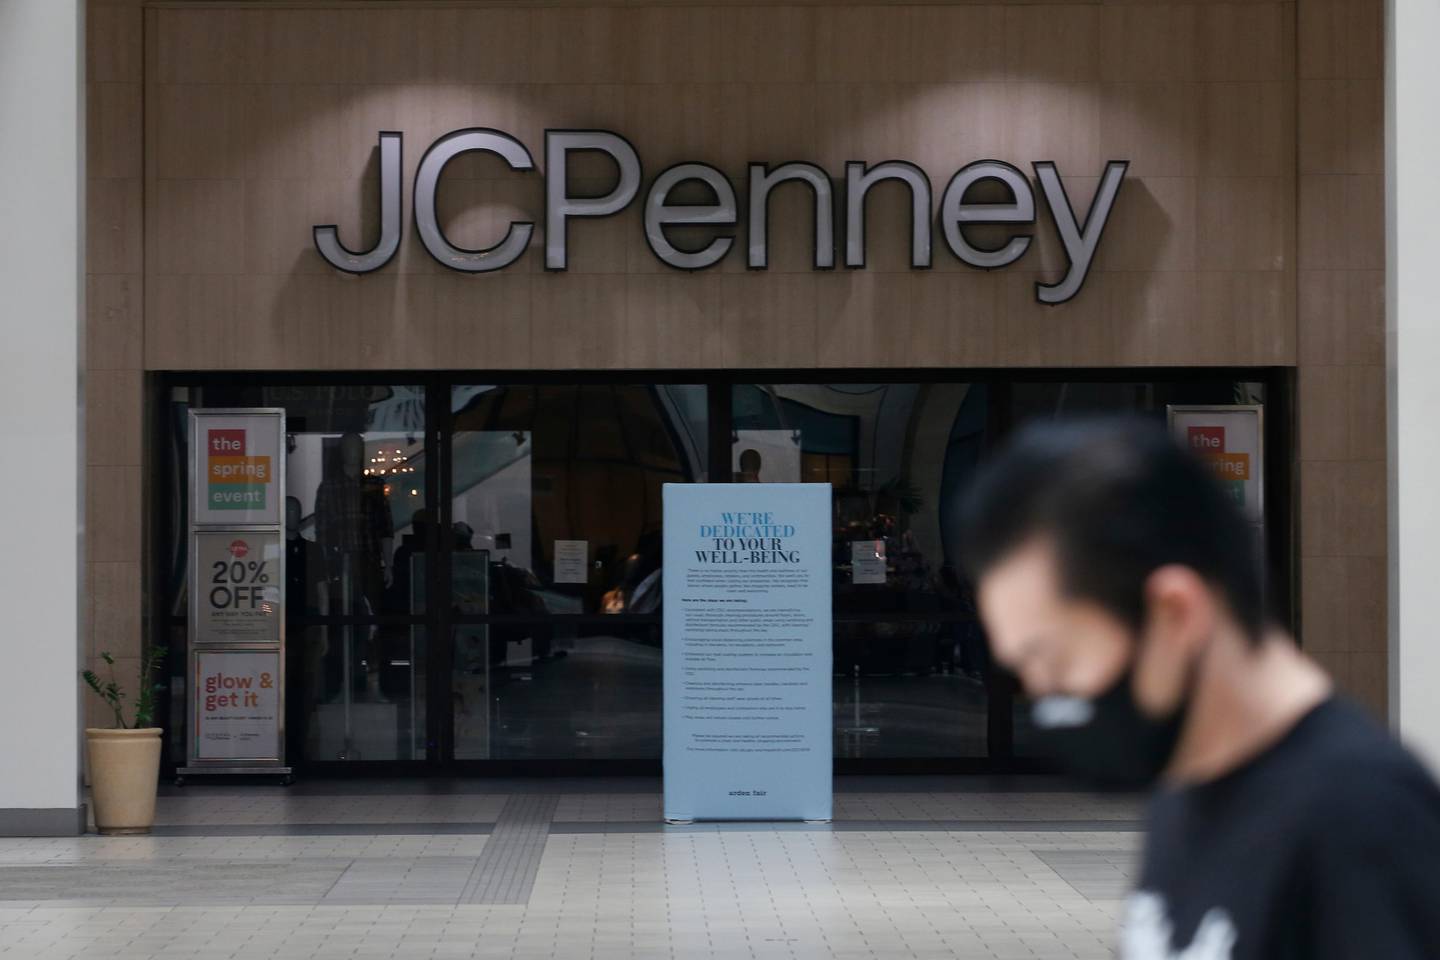 JCPenney was among the stores that stayed closed when the Arden Fair Mall reopened in Sacramento, Calif., Friday, May 29, 2020. Arden Fair reopened Friday since closing in March due to the coronavirus pandemic. (AP Photo/Rich Pedroncelli)